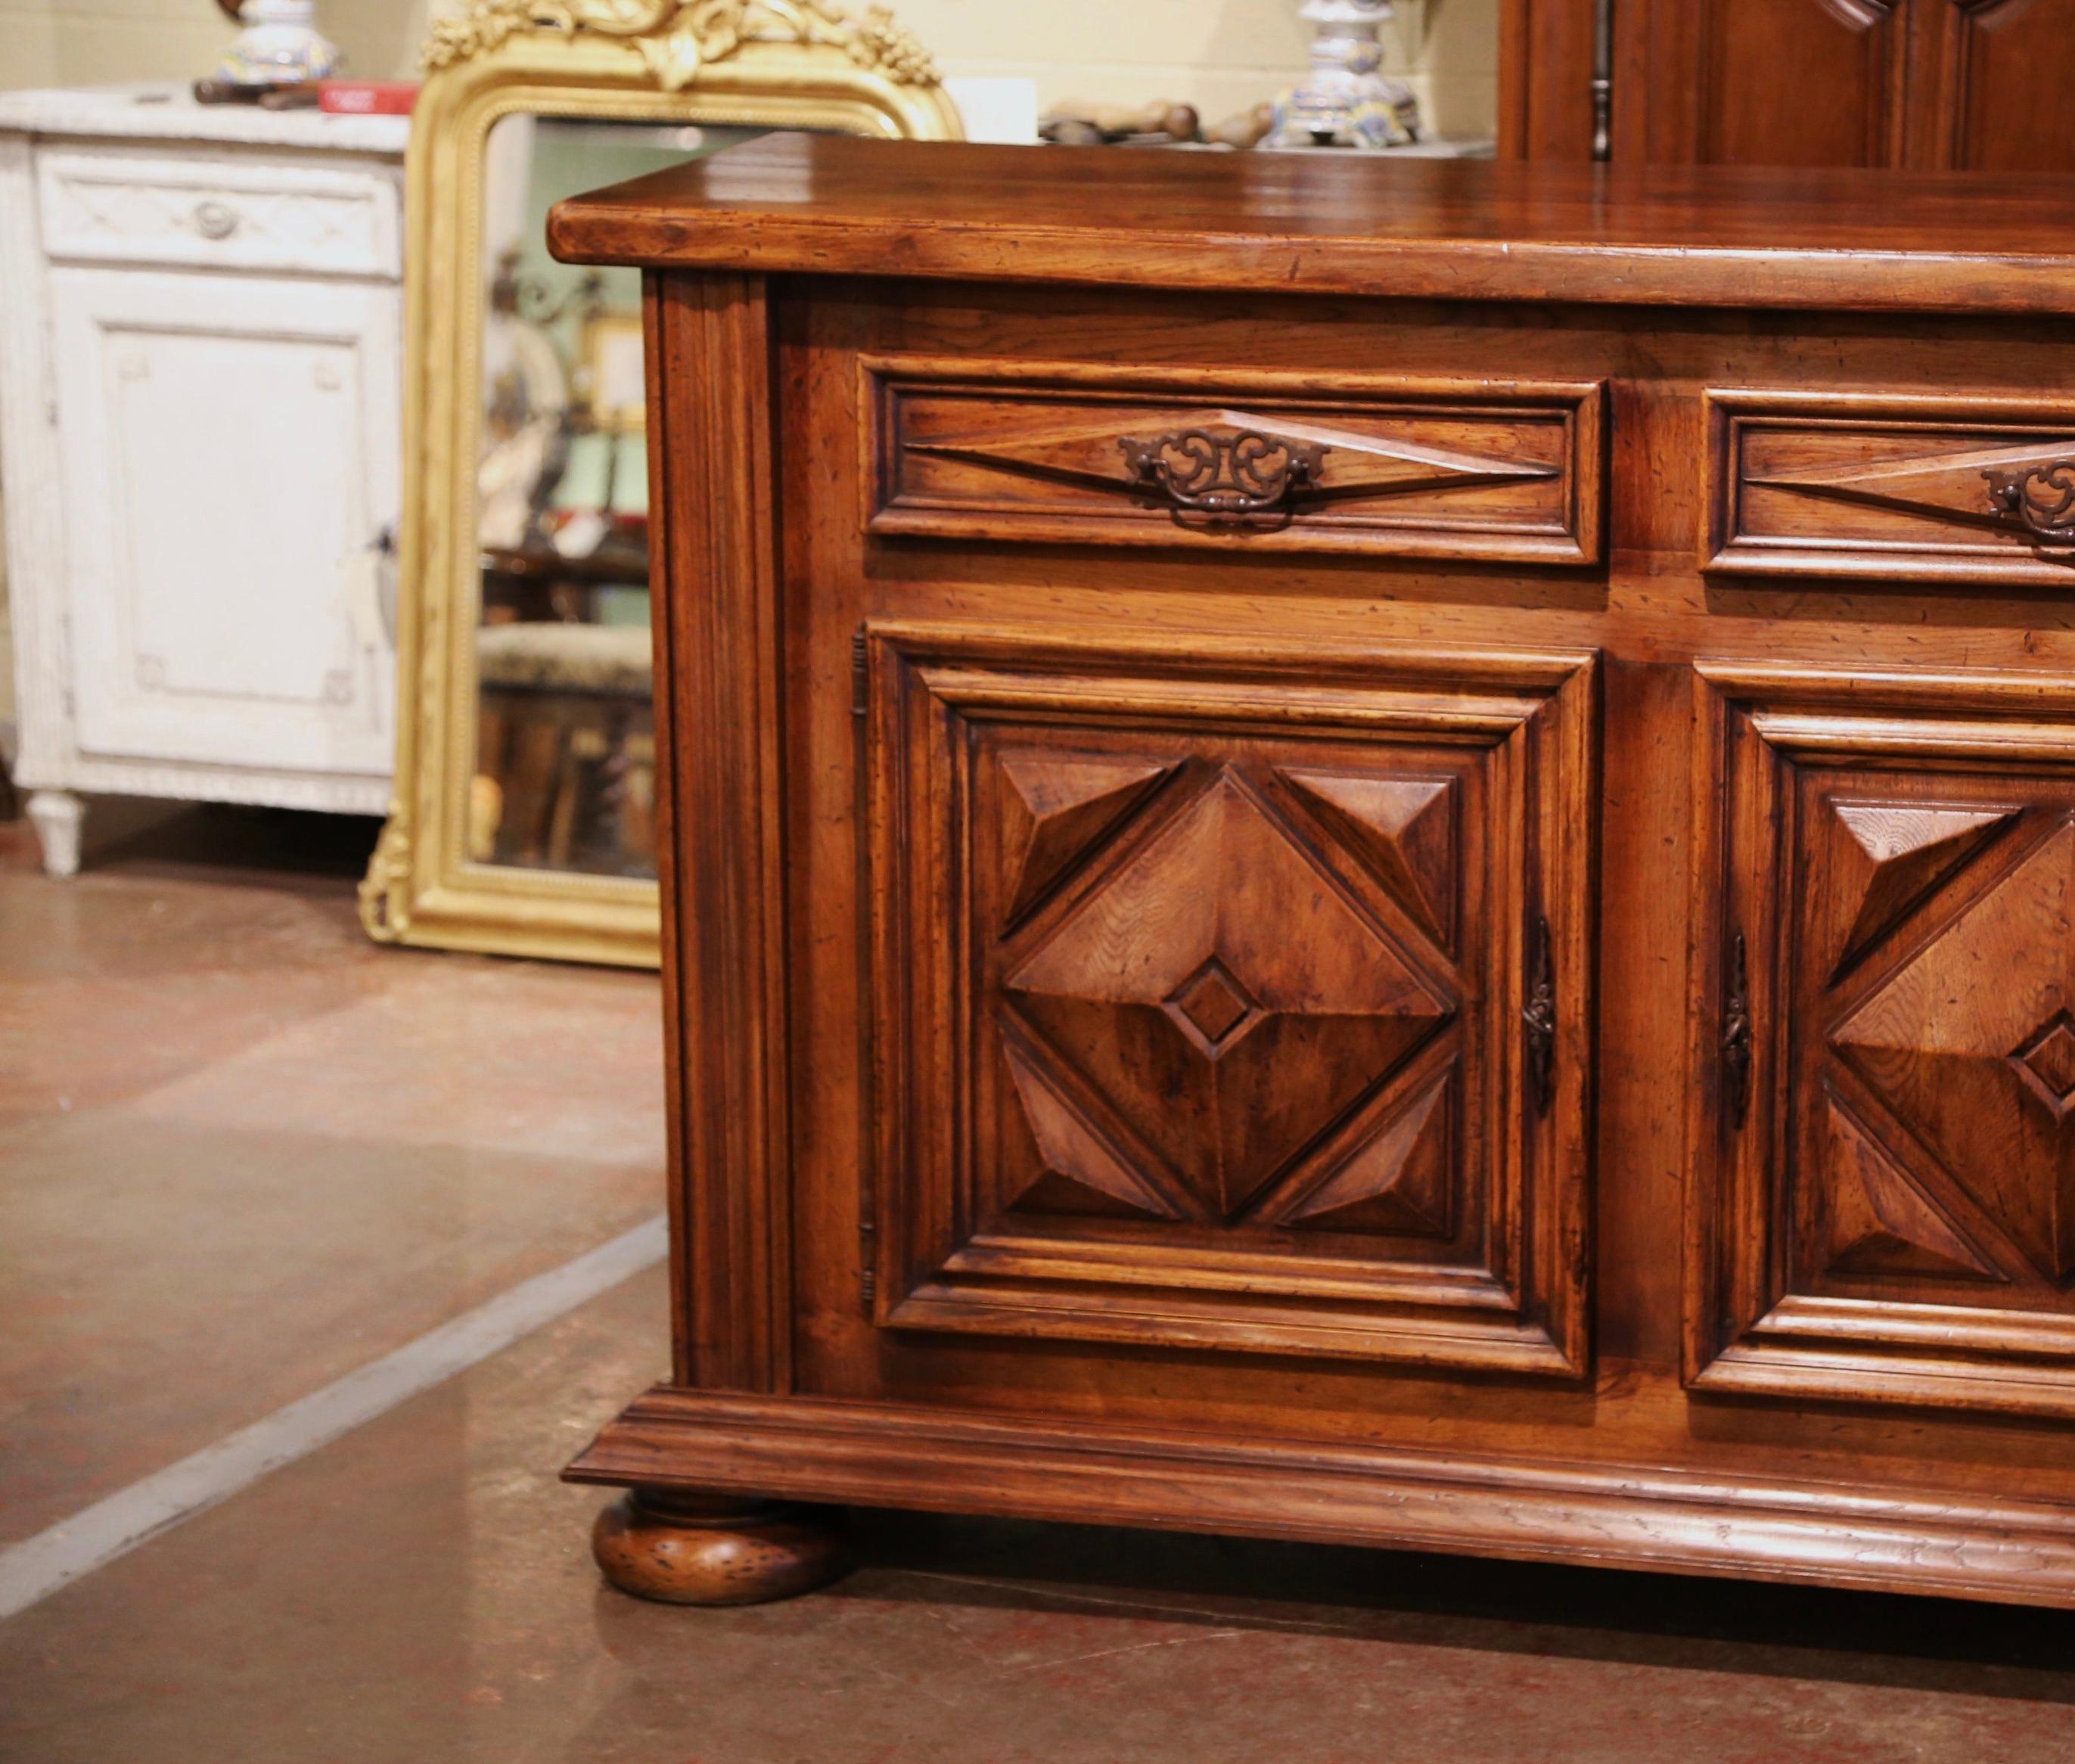 Carved in southern France circa 1920, this elegant antique enfilade stands on bun feet over a thick plinth apron. The cabinet features three carved drawers with 